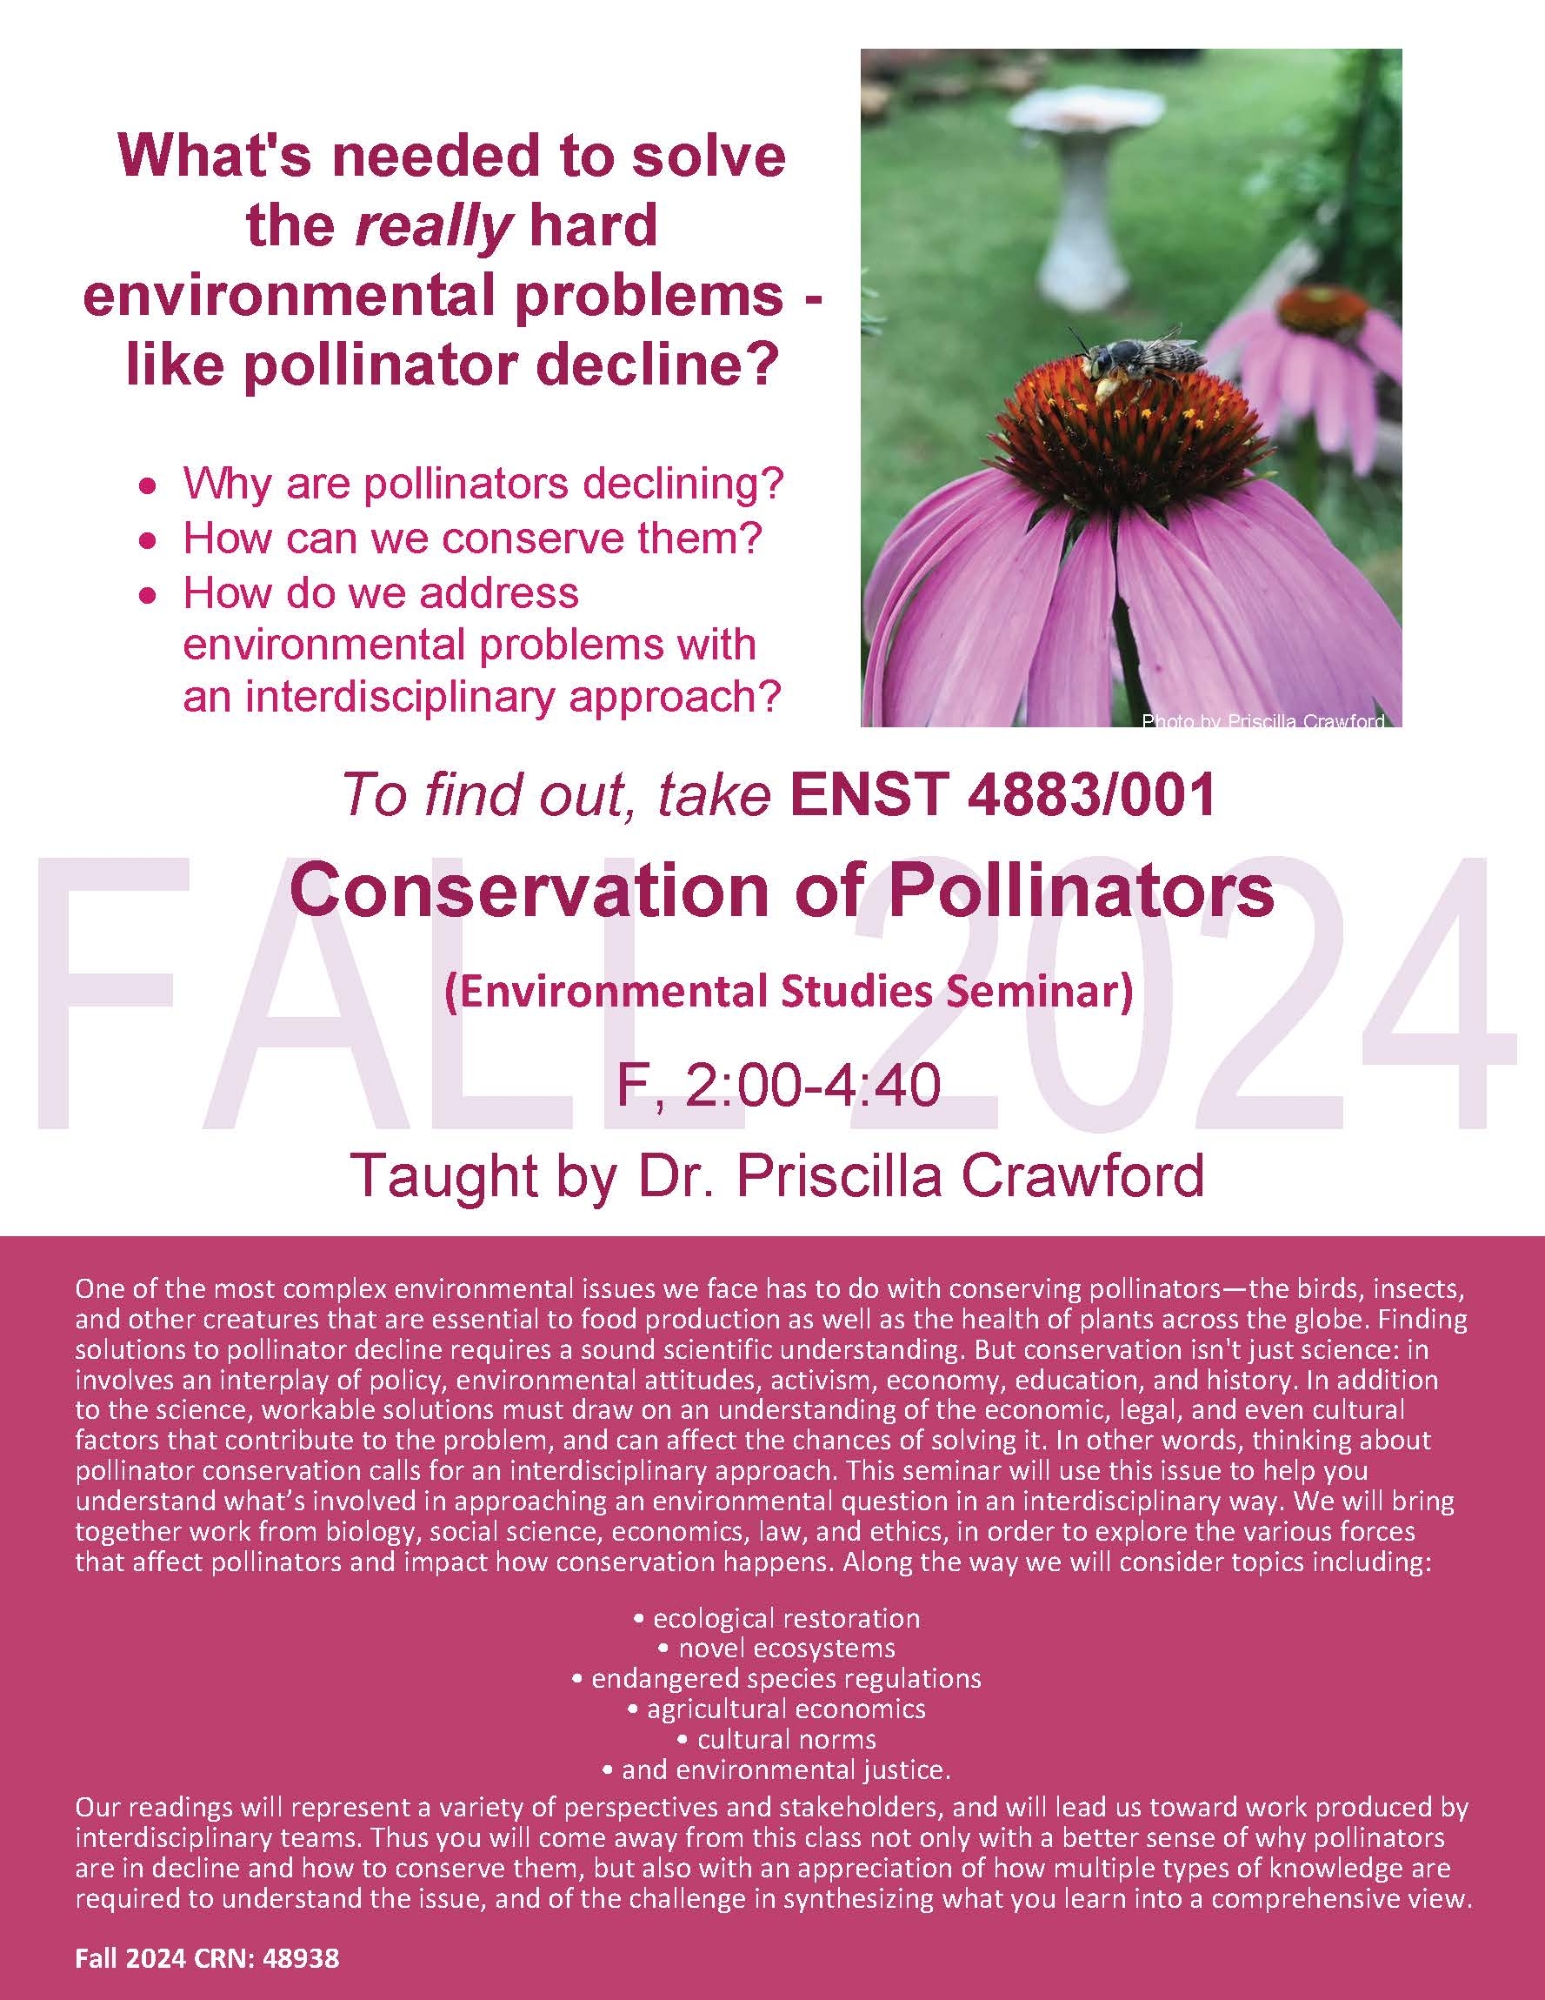 What's needed to solve the really hard environmental problems - like pollinator decline? • Why are pollinators declining? • How can we conserve them? • How do we address environmental problems with an interdisciplinary approach? To find out, take ENST 4883/001 Environmental Studies Seminar F, 2:00-4:40 Taught by Dr. Priscilla Crawford Photo by Priscilla Crawford One of the most complex environmental issues we face has to do with conserving pollinators—the birds, insects, and other creatures that are essential to food production as well as the health of plants across the globe. Finding solutions to pollinator decline requires a sound scientific understanding. But conservation isn't just science: in involves an interplay of policy, environmental attitudes, activism, economy, education, and history. In addition to the science, workable solutions must draw on an understanding of the economic, legal, and even cultural factors that contribute to the problem, and can affect the chances of solving it. In other words, thinking about pollinator conservation calls for an interdisciplinary approach. This seminar will use this issue to help you understand what’s involved in approaching an environmental question in an interdisciplinary way. We will bring together work from biology, social science, economics, law, and ethics, in order to explore the various forces that affect pollinators and impact how conservation happens. Along the way we will consider topics including: • ecological restoration • novel ecosystems • endangered species regulations • agricultural economics • cultural norms • and environmental justice. Our readings will represent a variety of perspectives and stakeholders, and will lead us toward work produced by interdisciplinary teams. Thus you will come away from this class not only with a better sense of why pollinators are in decline and how to conserve them, but also with an appreciation of how multiple types of knowledge are required to understand the issue, and of the challenge in synthesizing what you learn into a comprehensive view. Fall 2024 CRN: 48938 FALL 2024